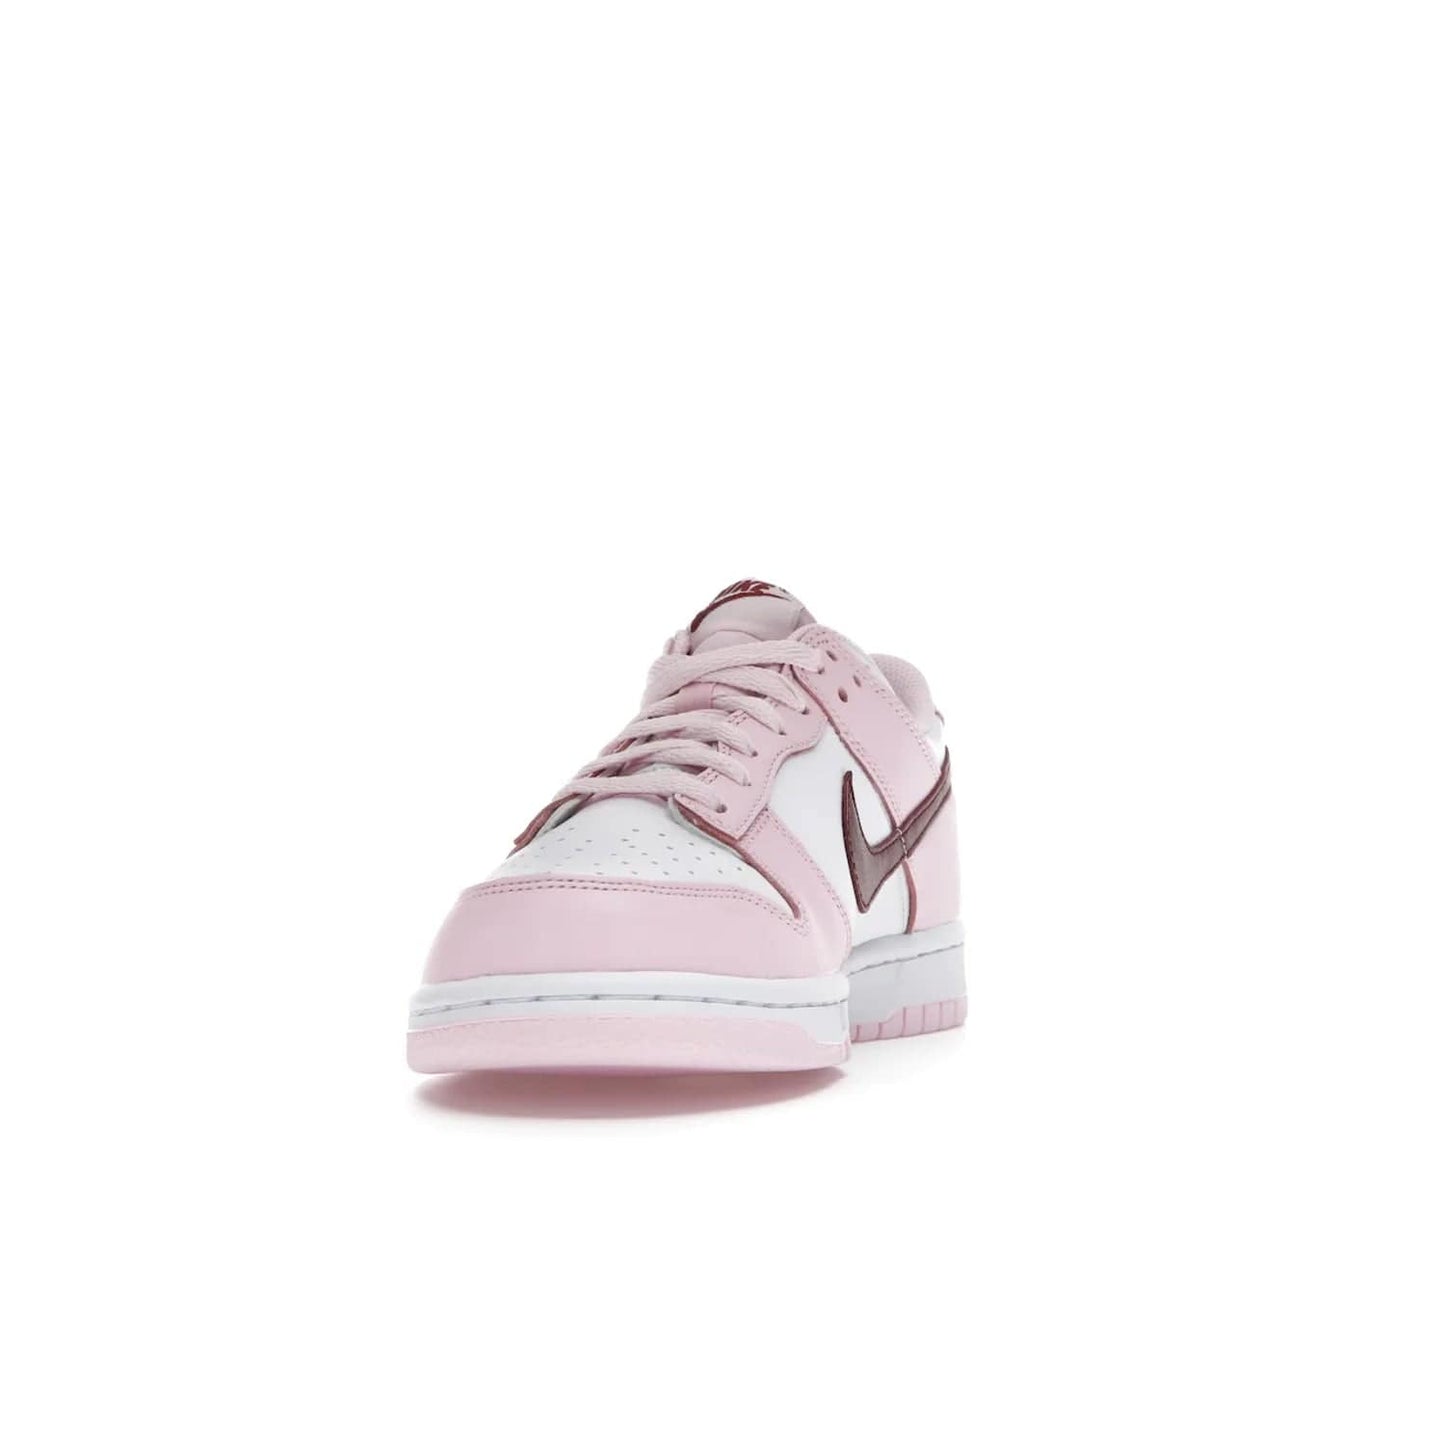 Nike Dunk Low Pink Foam Red White (GS) - Image 12 - Only at www.BallersClubKickz.com - #
Introducing the daring and stylish Nike Dunk Low Pink Foam Red White (GS) sneaker for grade schoolers. White leather with pink overlays and Dark Beetroot accents, classic Nike Dunk midsole and pink outsole. Released August 2021 for $85.